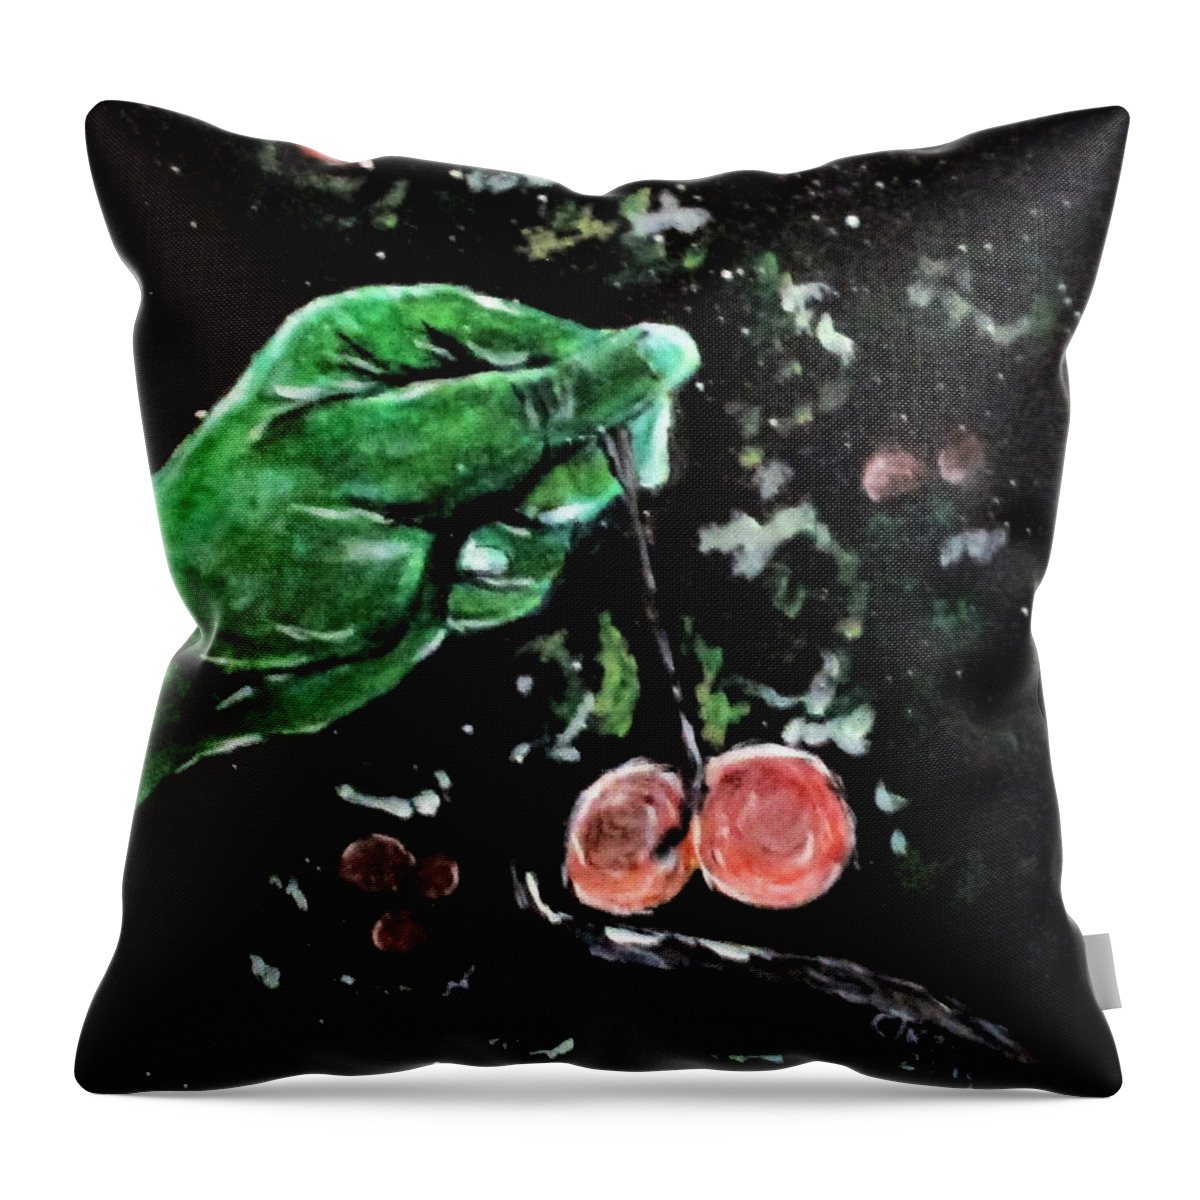 Green Throw Pillow featuring the painting Christophers Fuzzies by Clyde J Kell